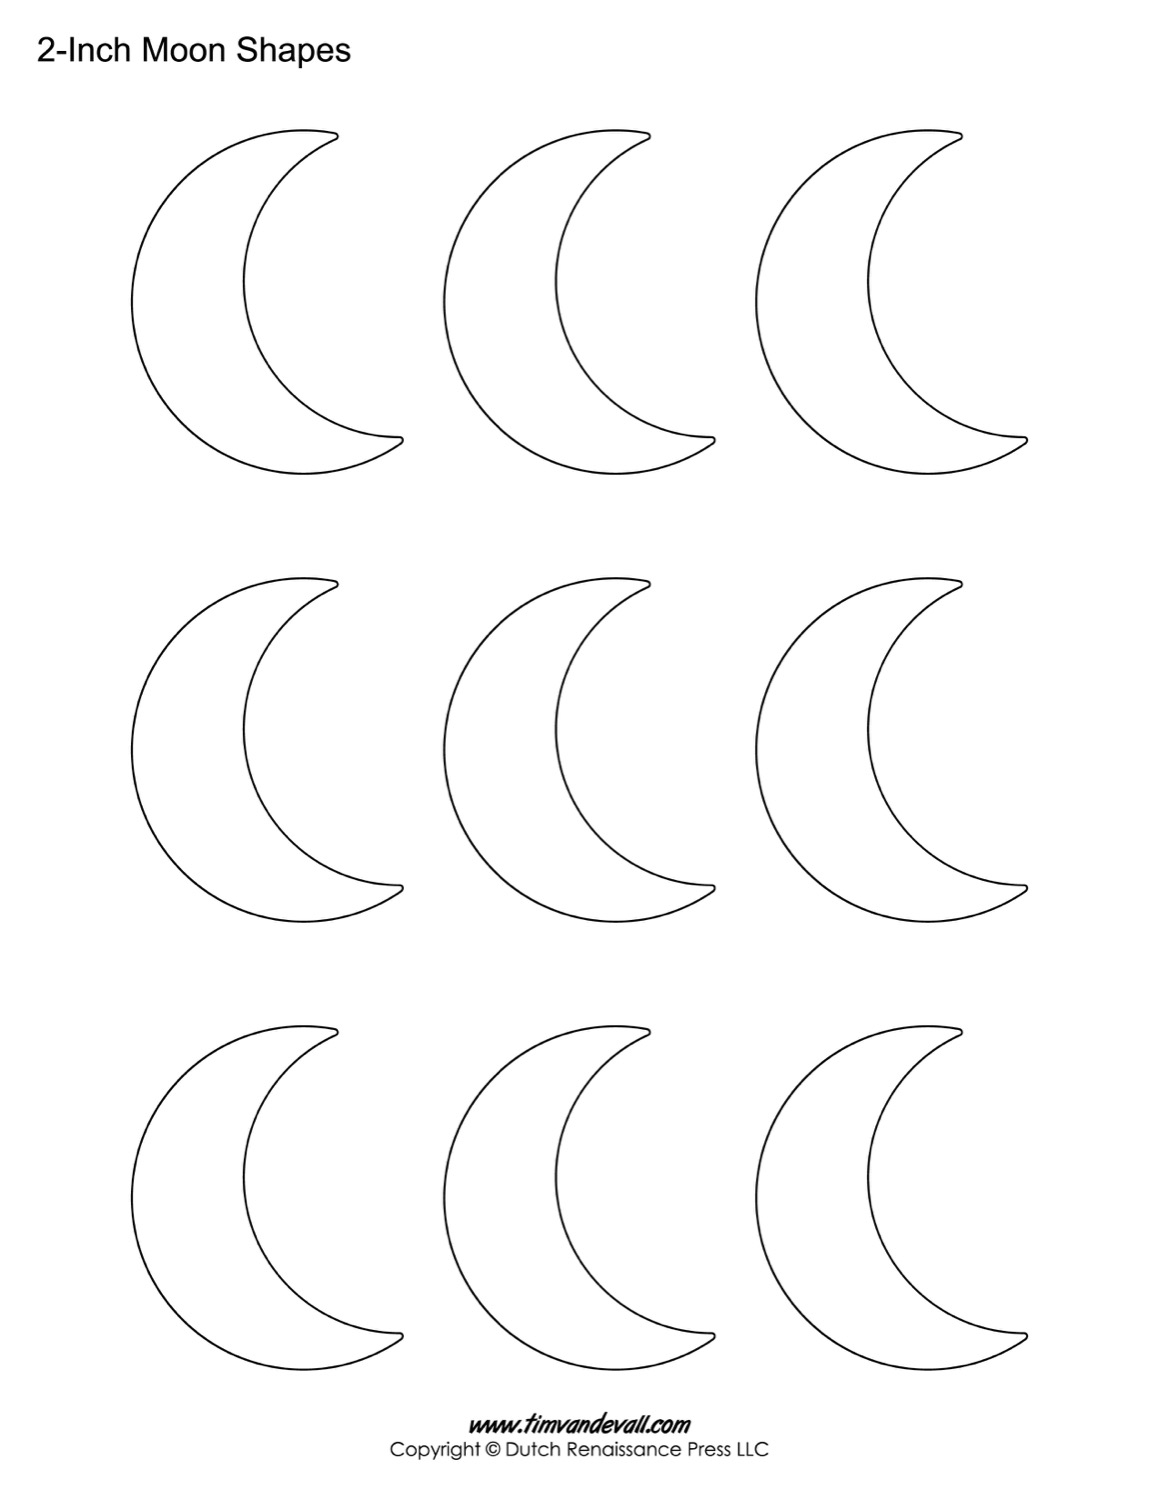 Moon shapes for kids